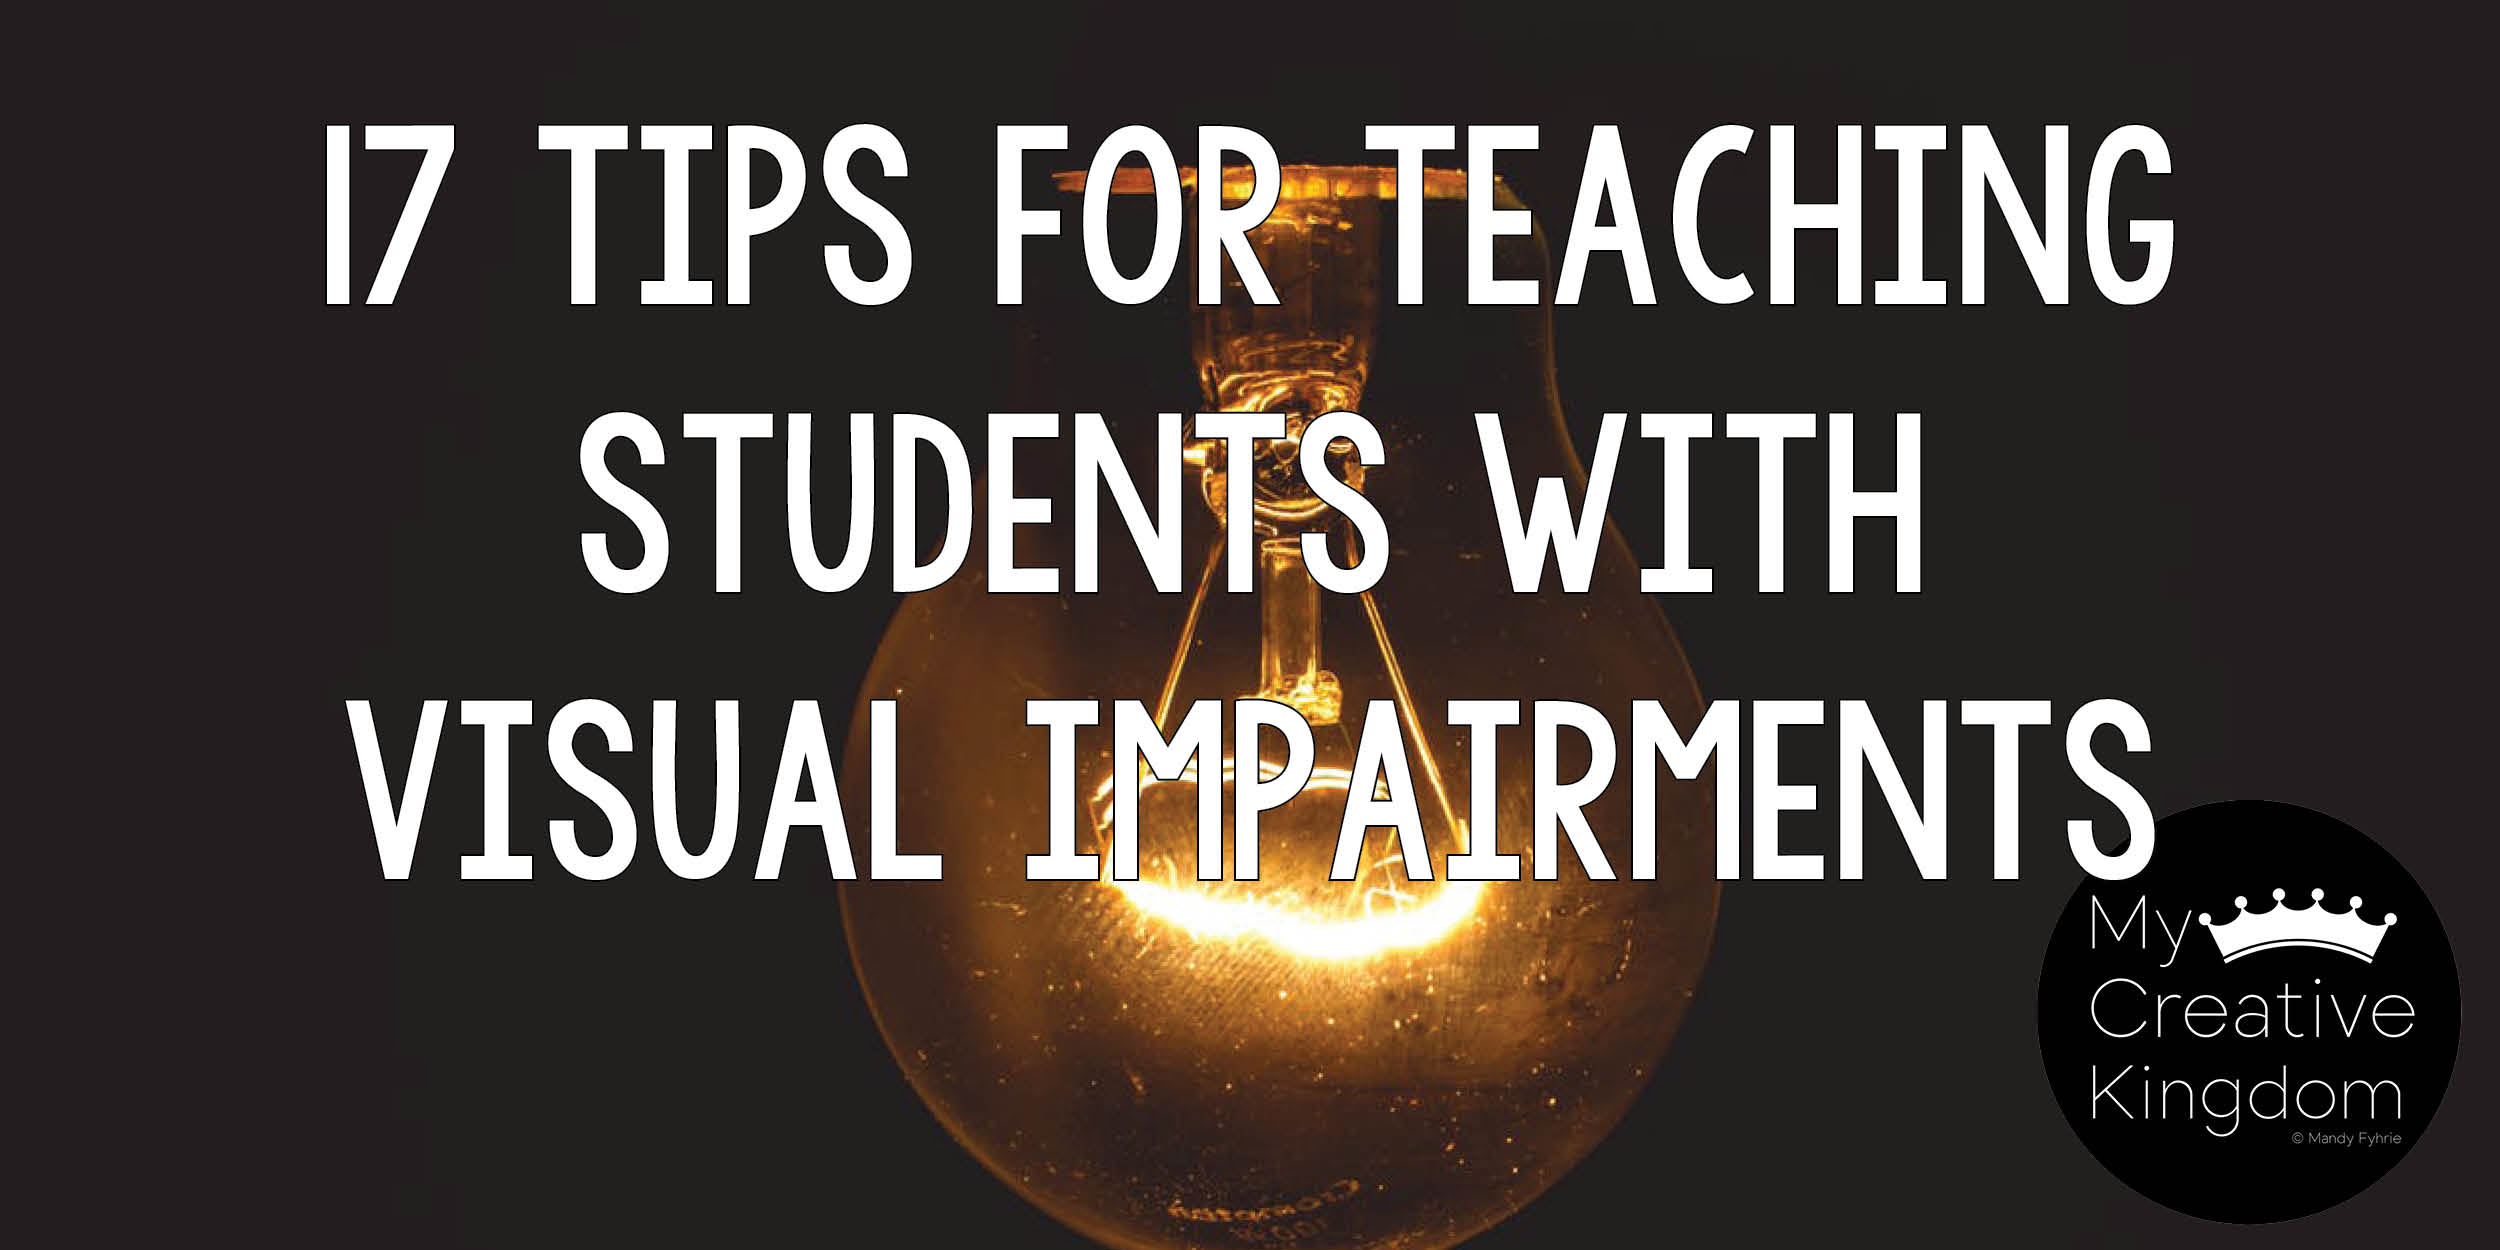 17 Tips for Teaching Students with Visual Impairments